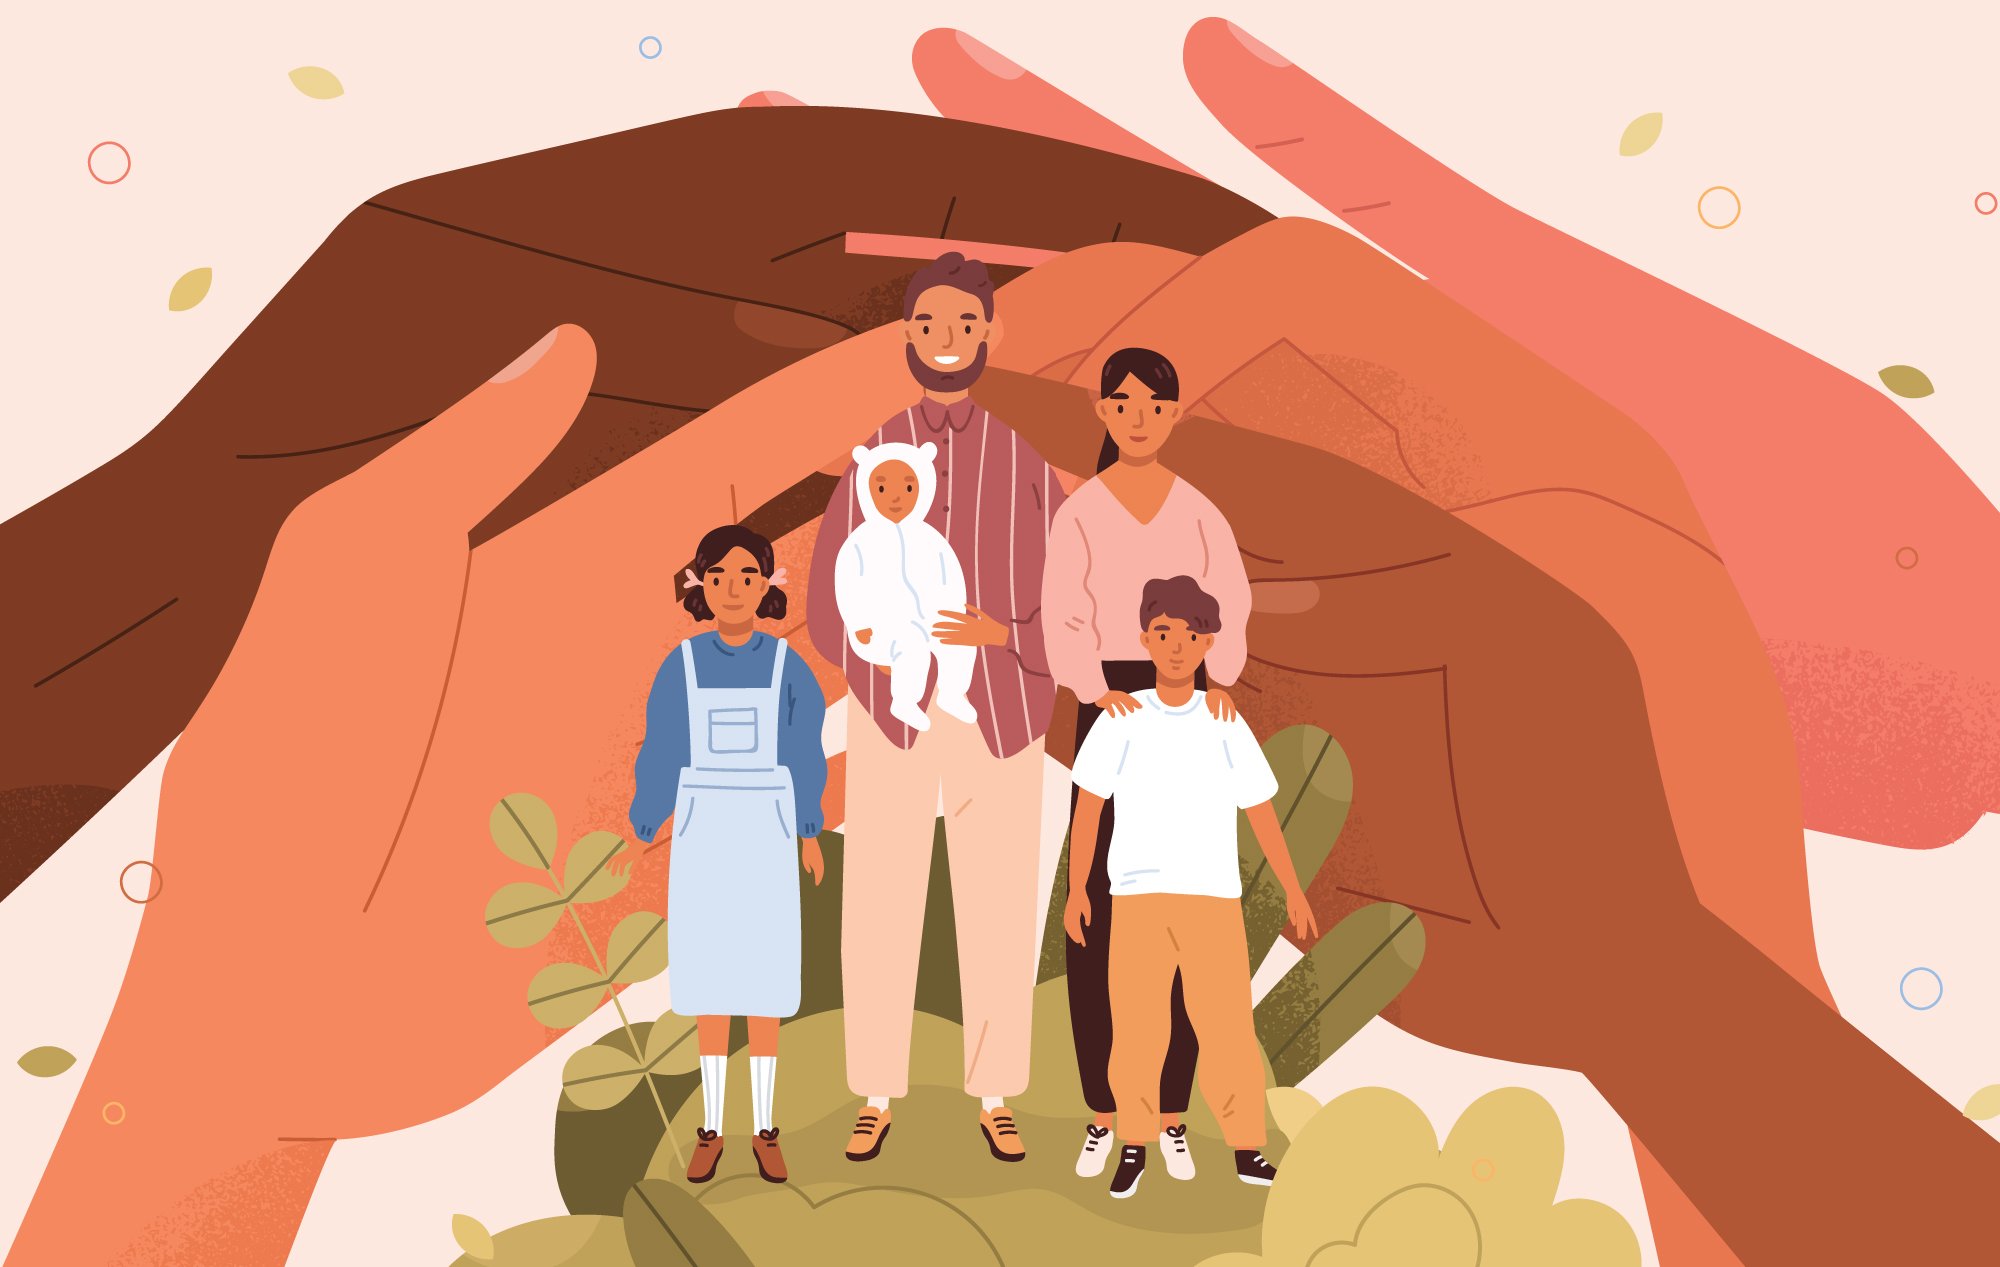 Illustration of five giant hands supporting a family of five.